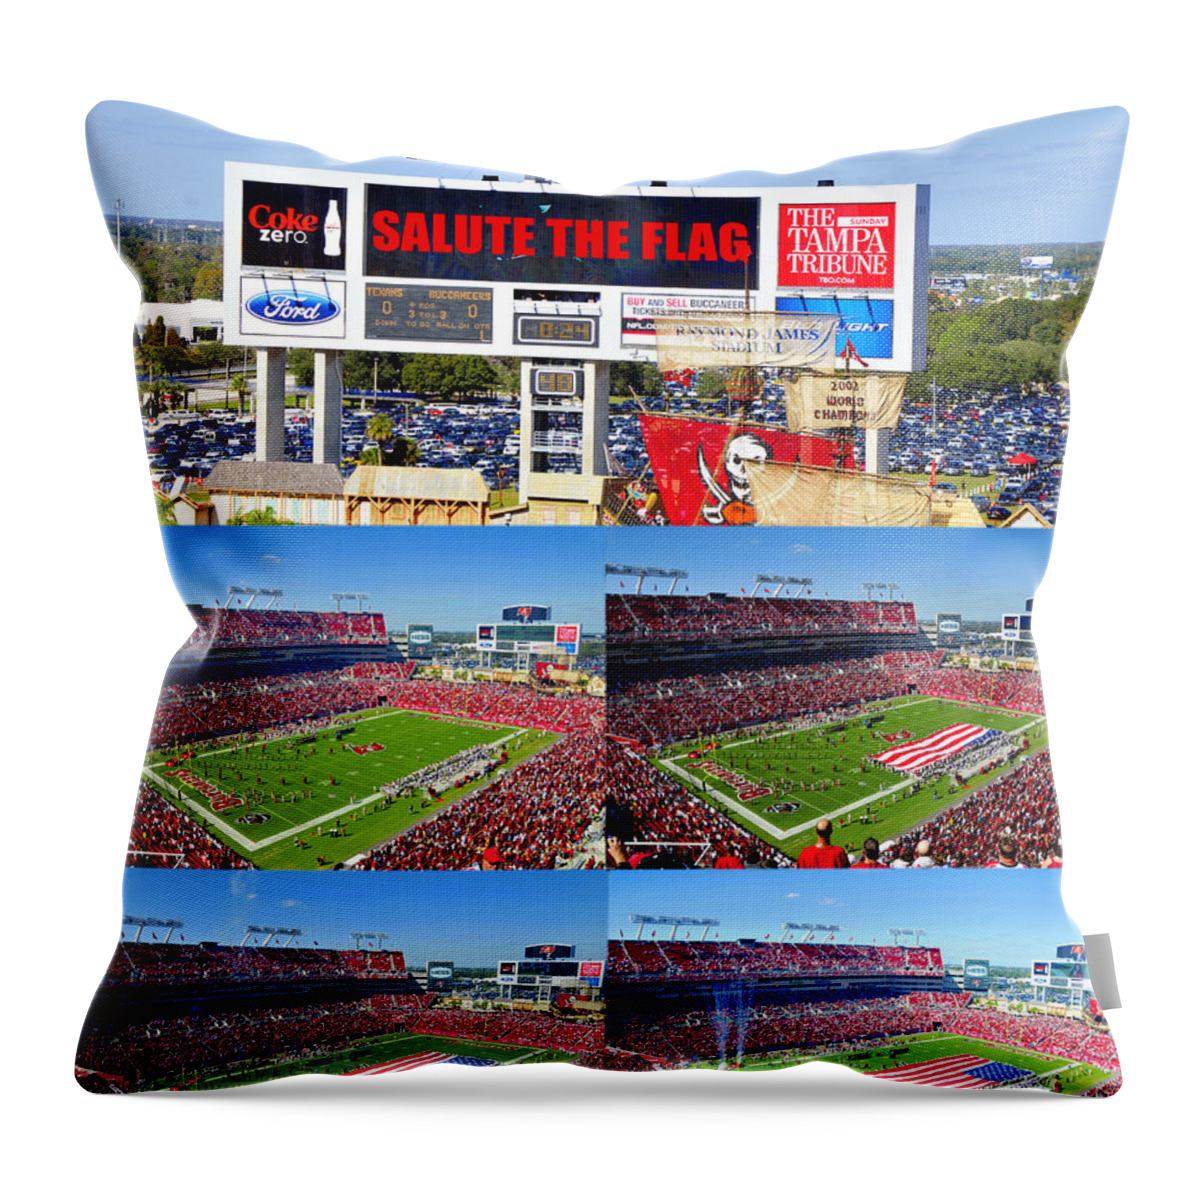 Salute The Flag Throw Pillow featuring the photograph Salute the Flag by David Lee Thompson